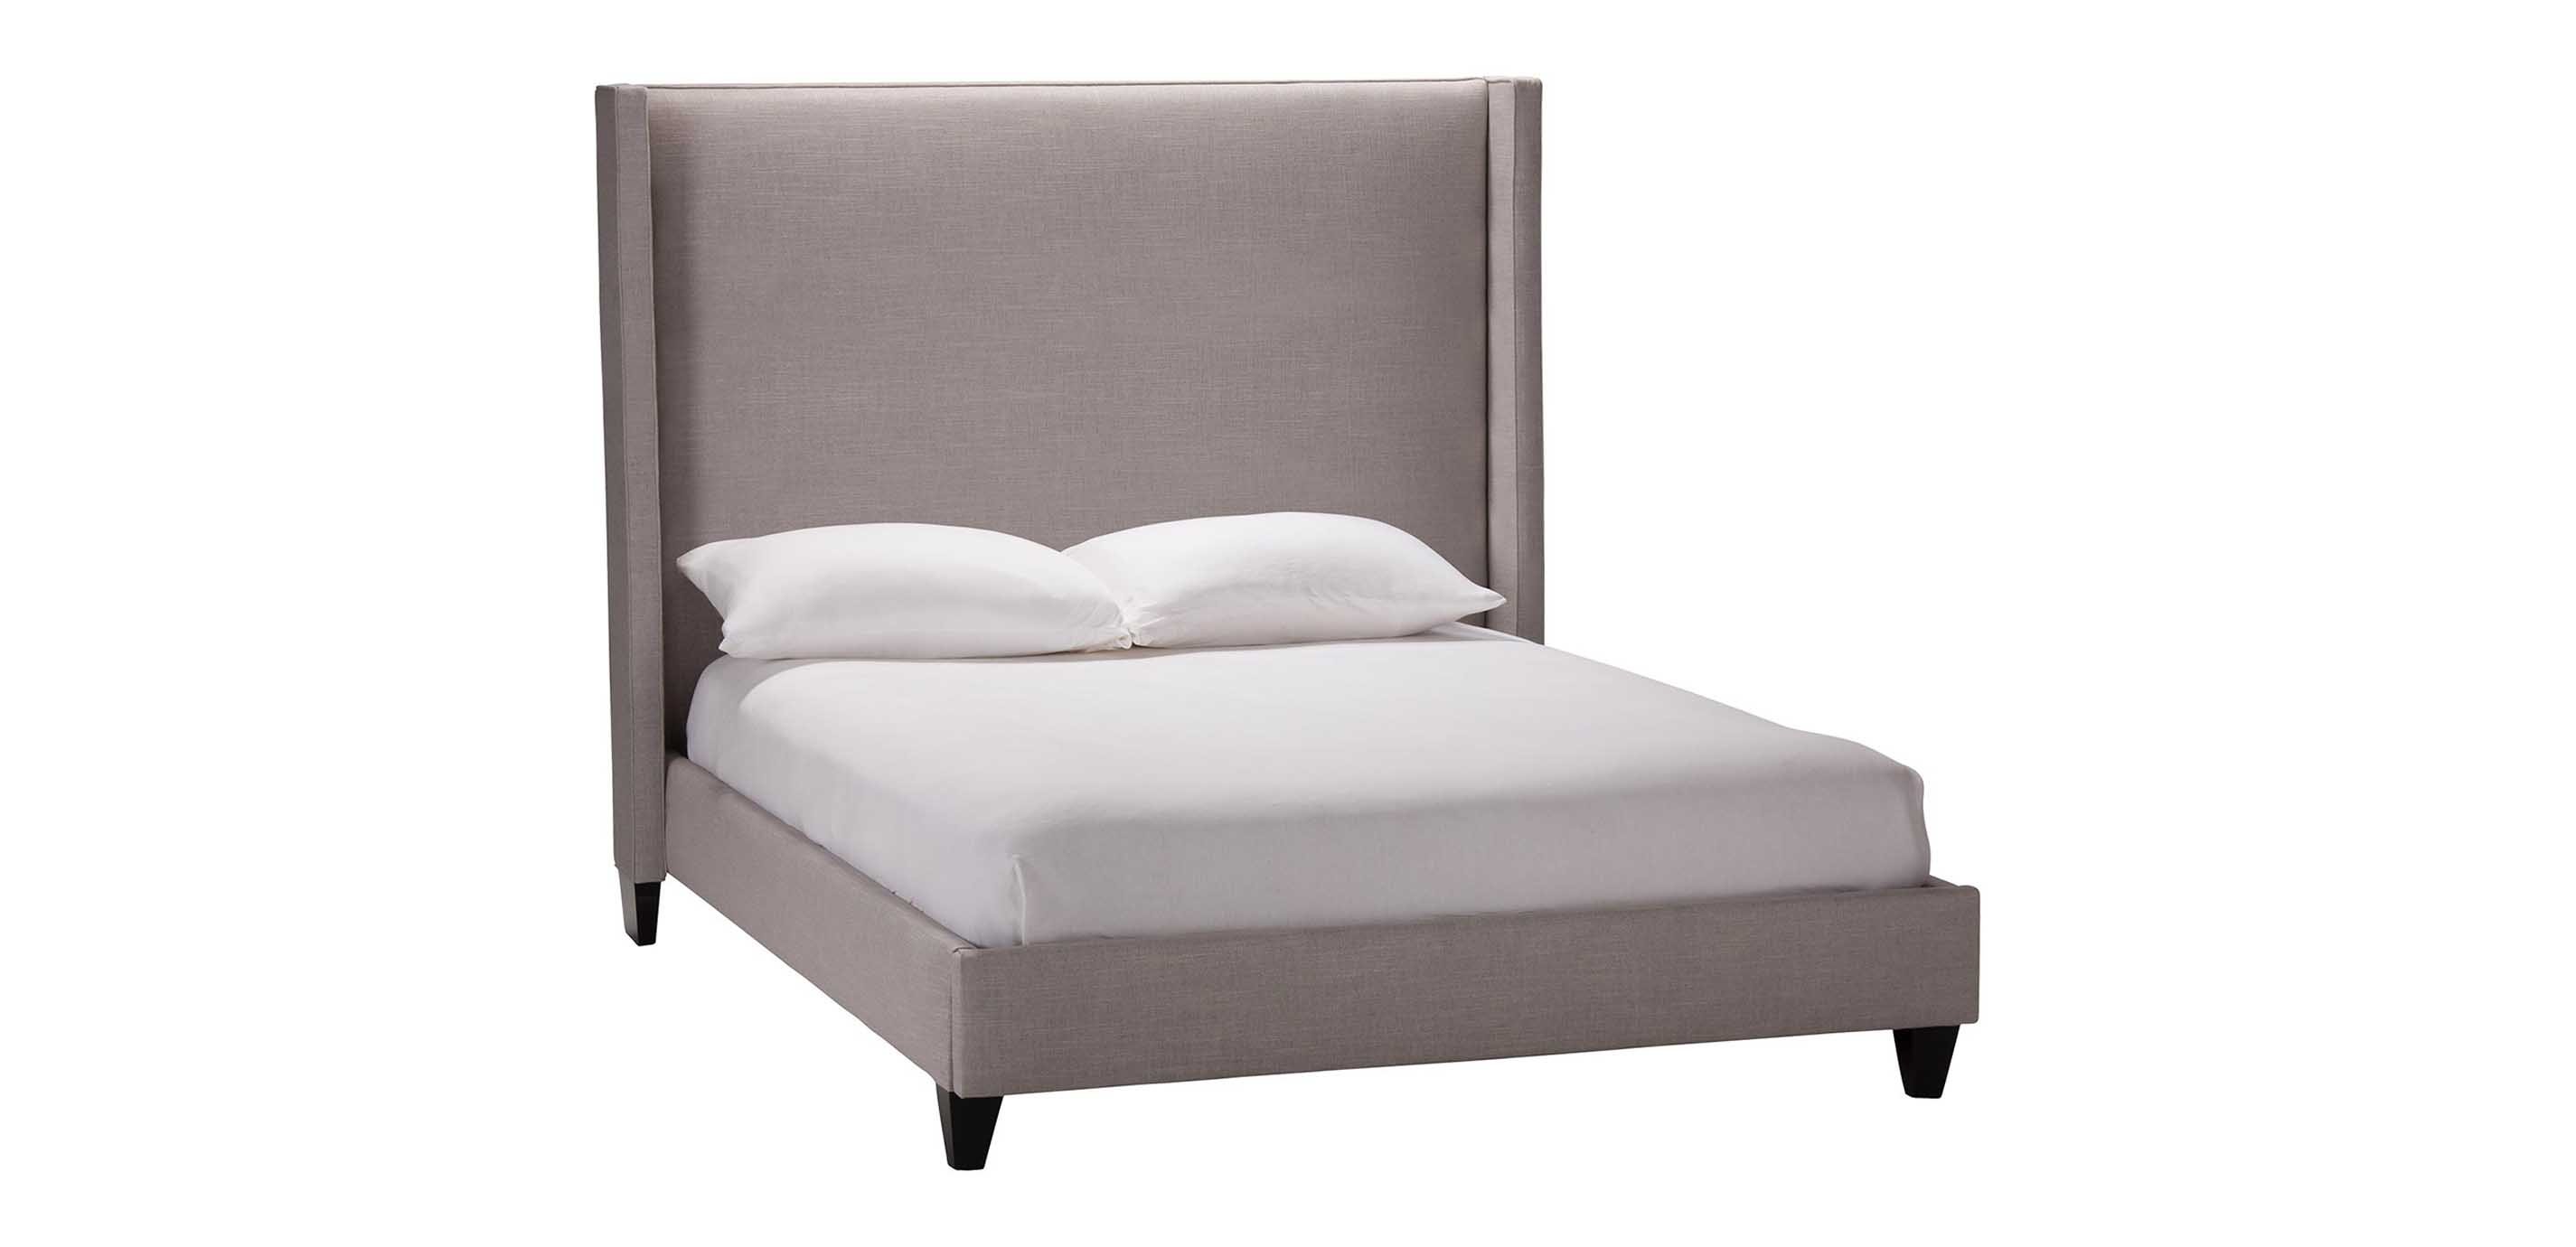 Colton Upholstered Bed With Tall, High Headboard Bed Frame